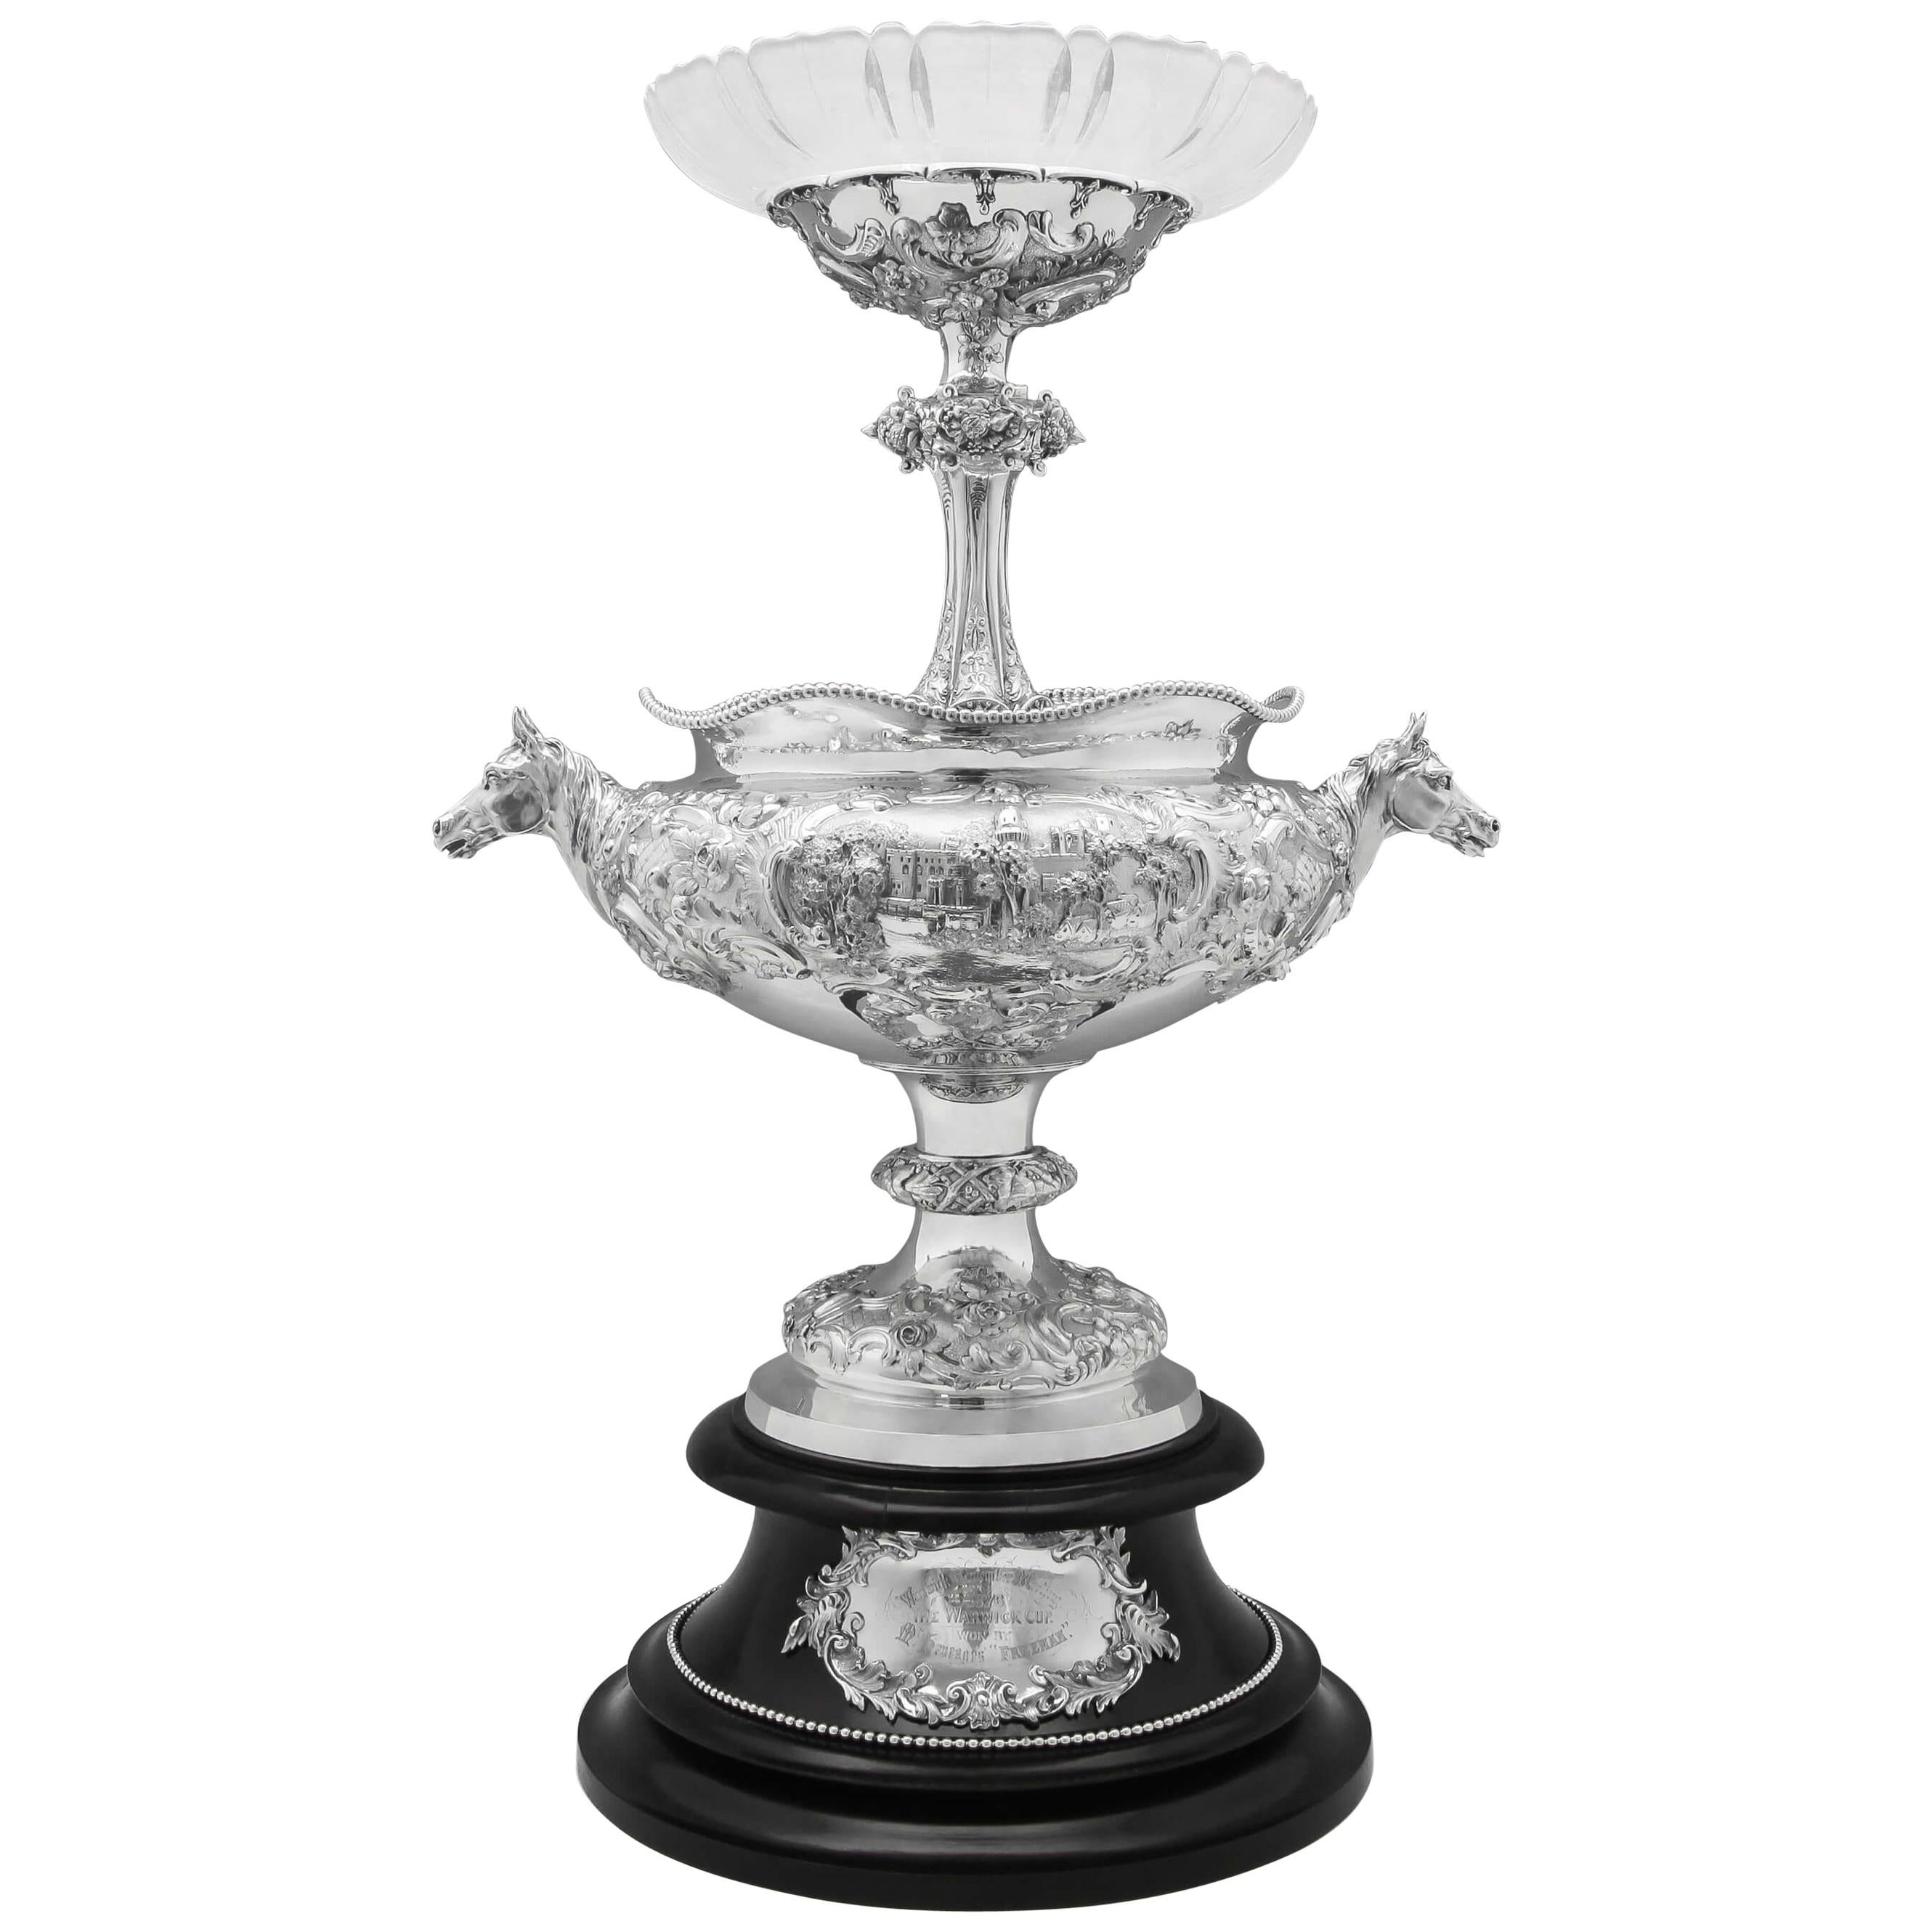 'The Warwick Cup' Antique Sterling Silver Horse Racing Centrepiece from 1876